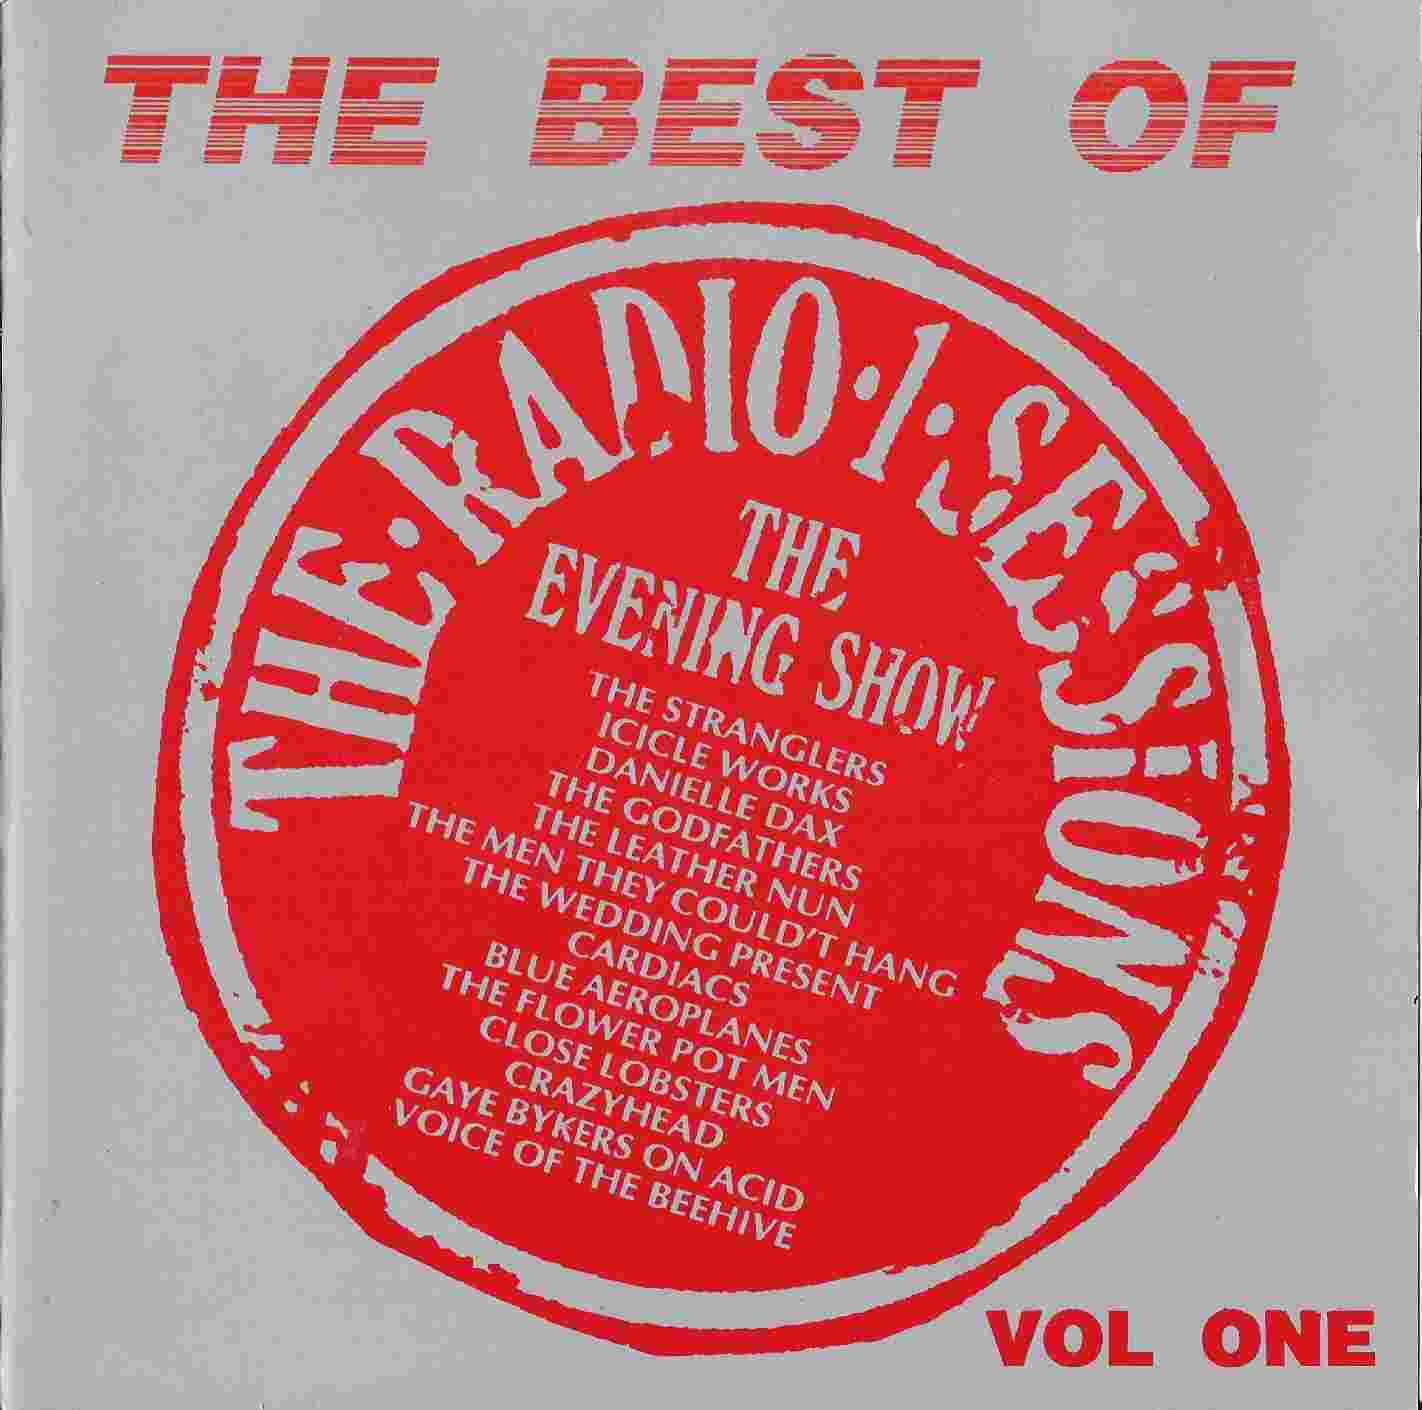 Picture of CDNT 100 The best of the Radio 1 sessions - Volume 1 by artist Various